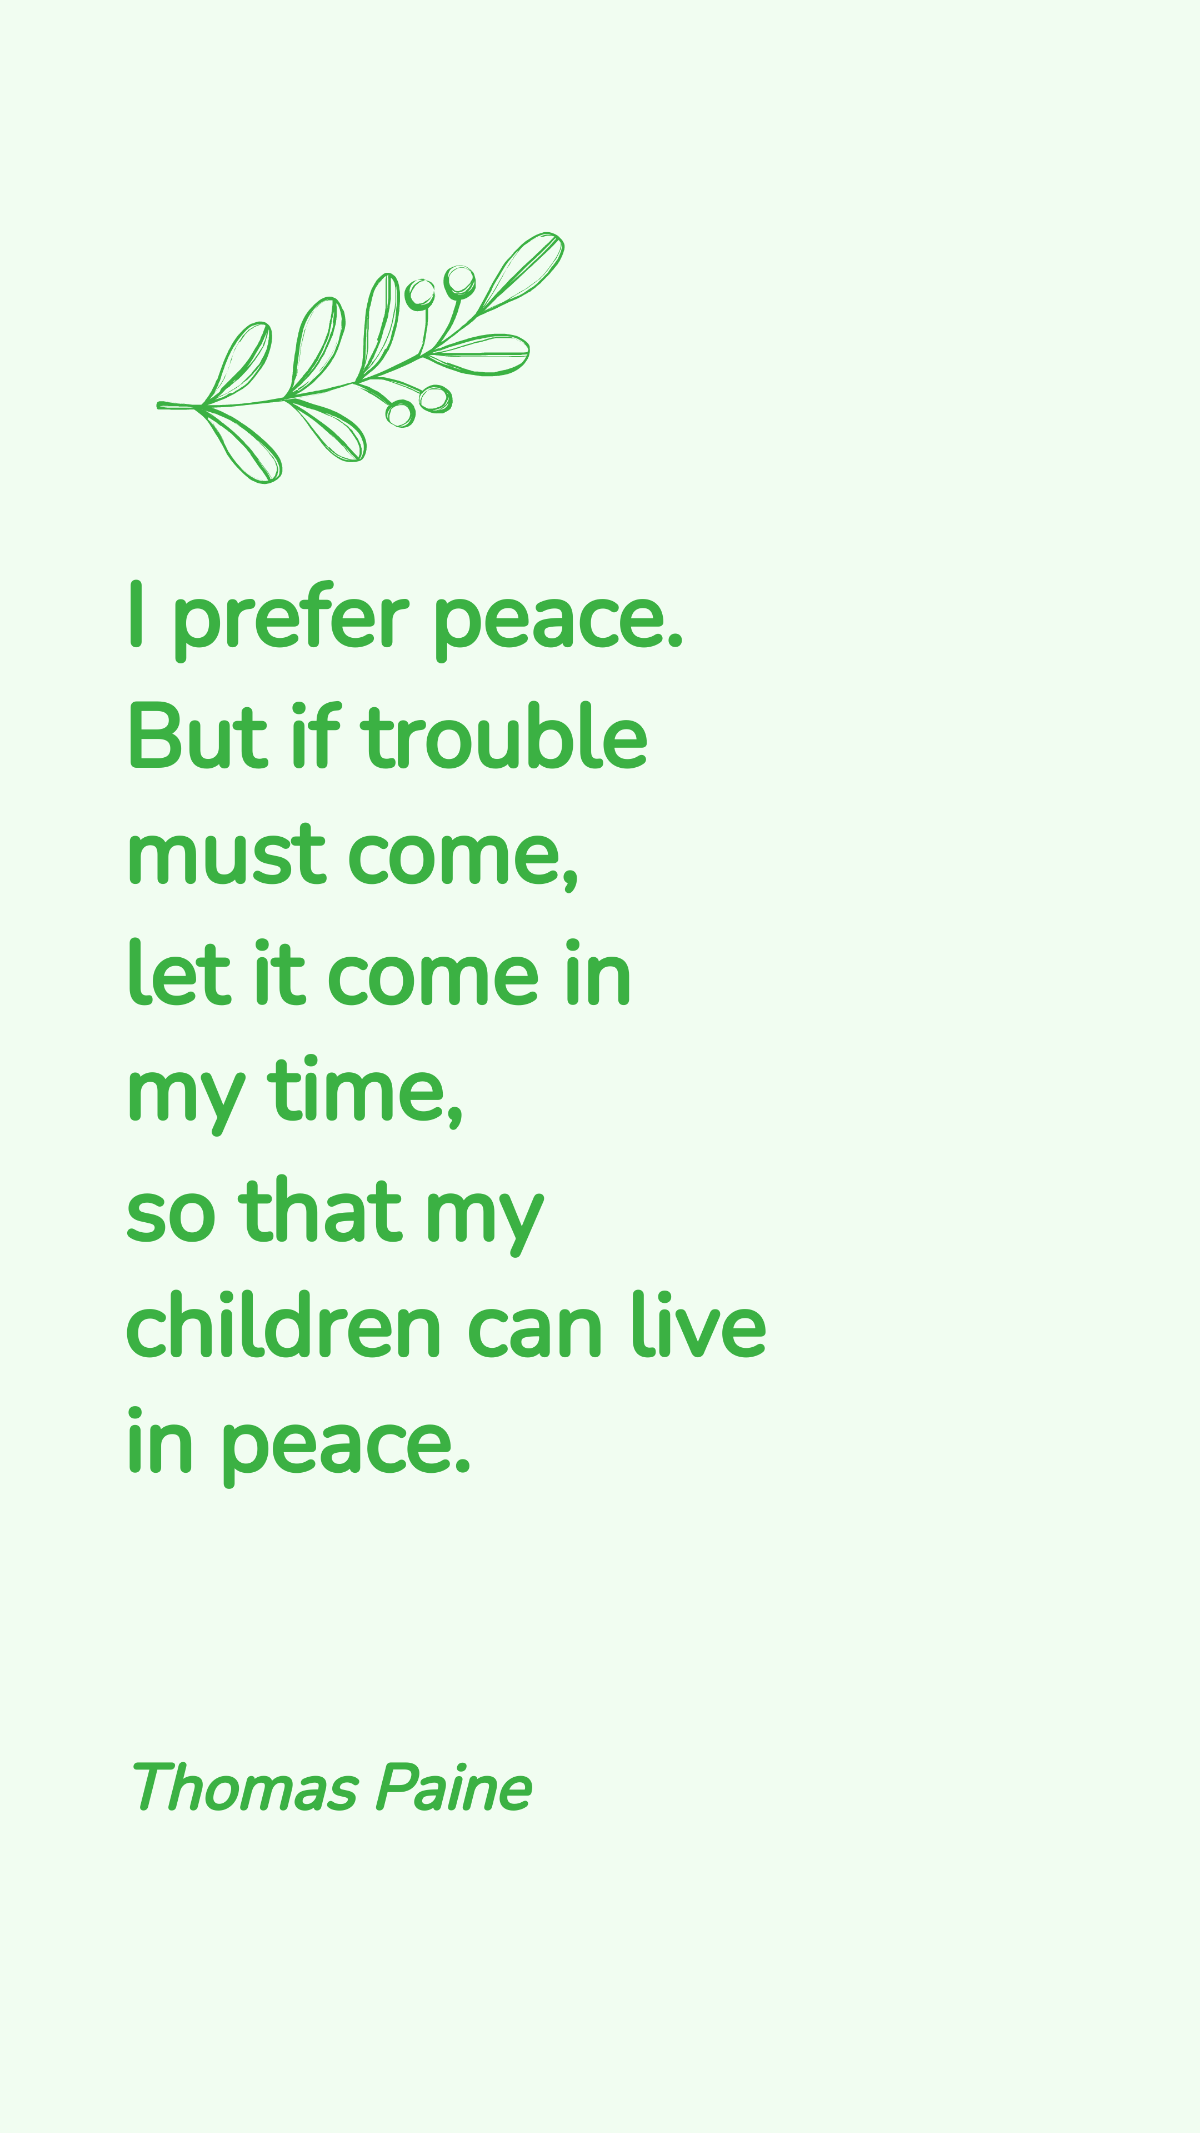 Thomas Paine - I prefer peace. But if trouble must come, let it come in my time, so that my children can live in peace.  Template